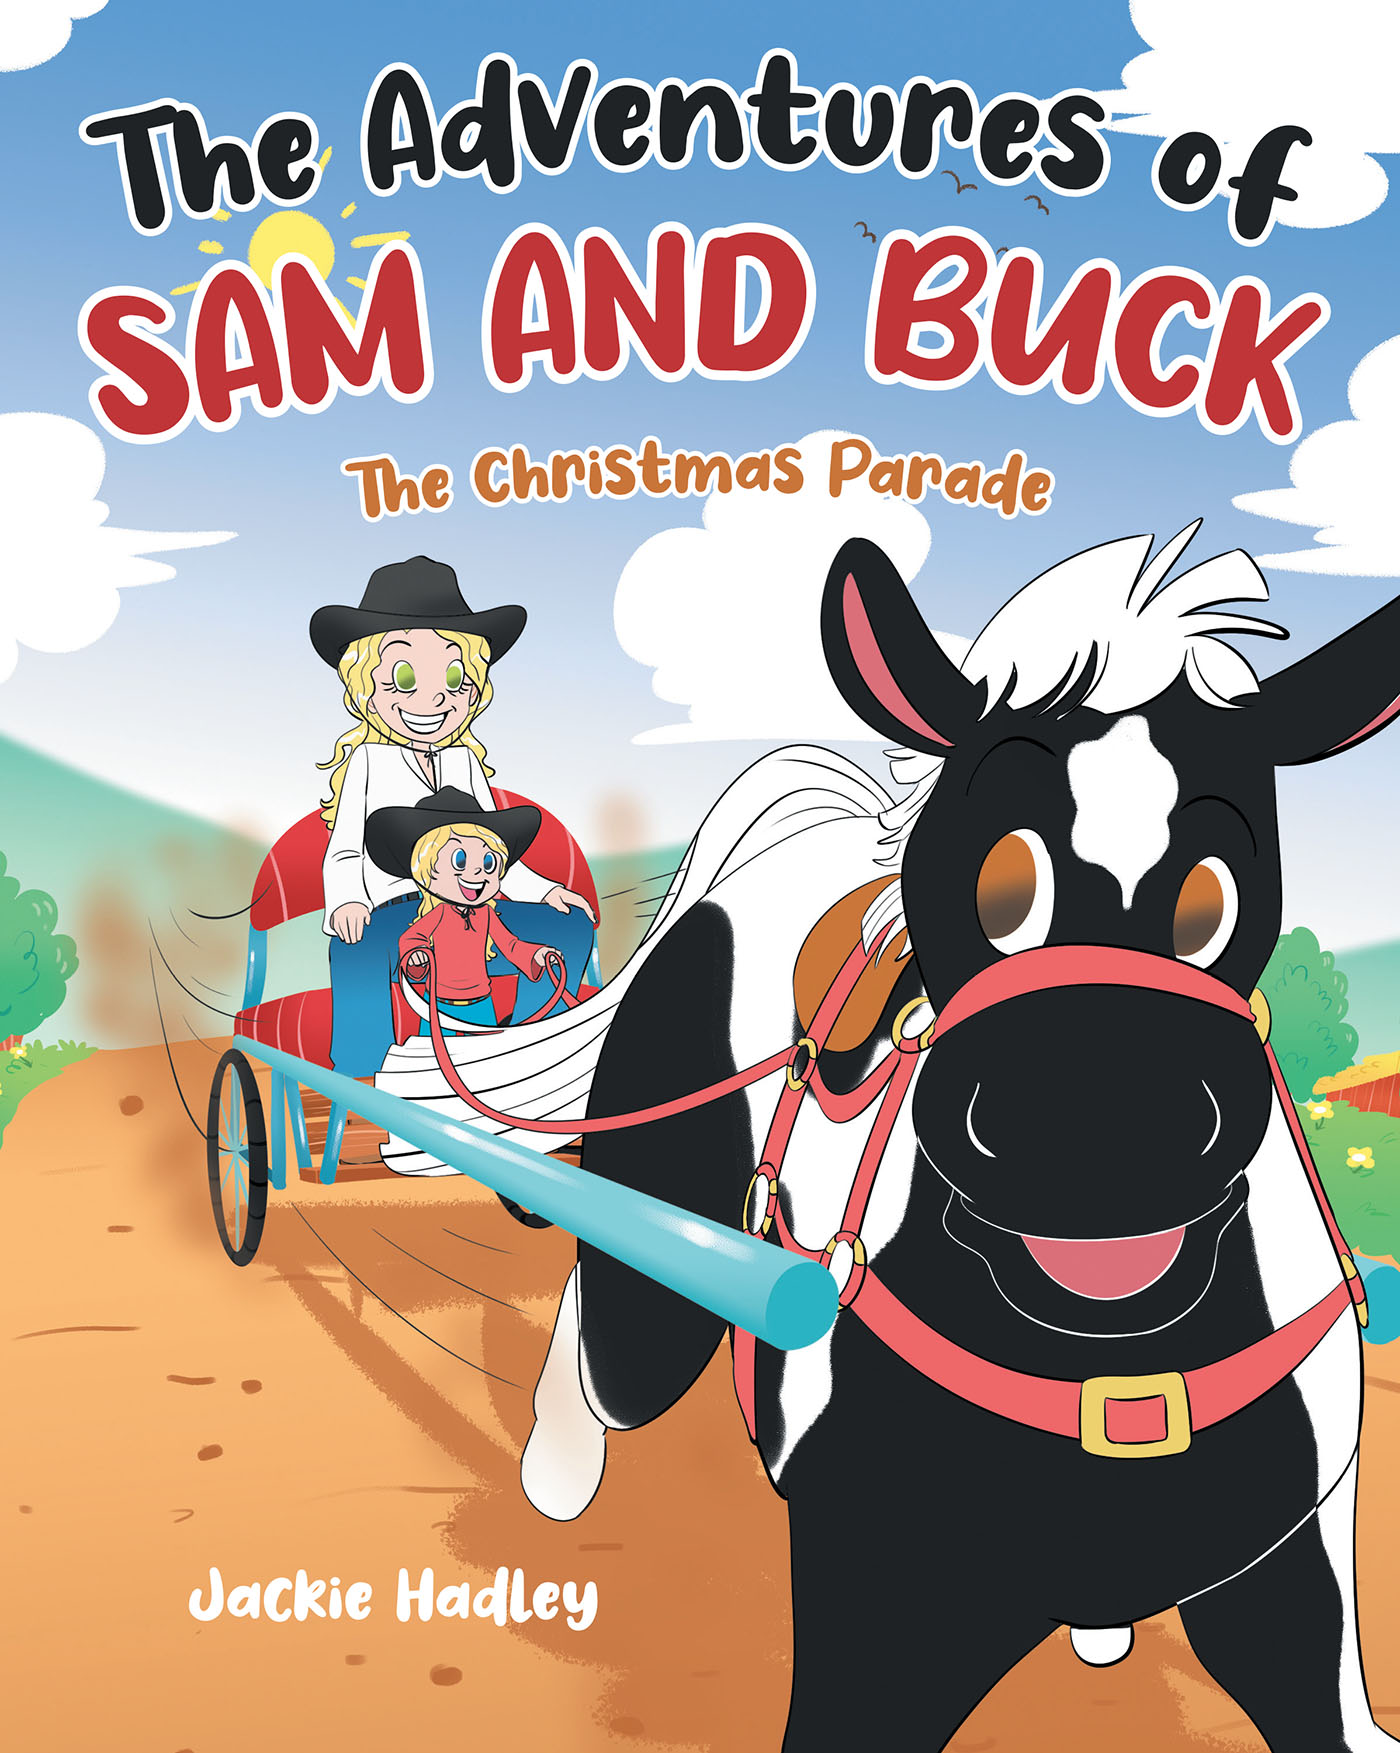 Author Jackie Hadley’s New Book, “The Adventures of Sam and Buck: The Christmas Parade,” is a True Story About Love, Trust, and Determination